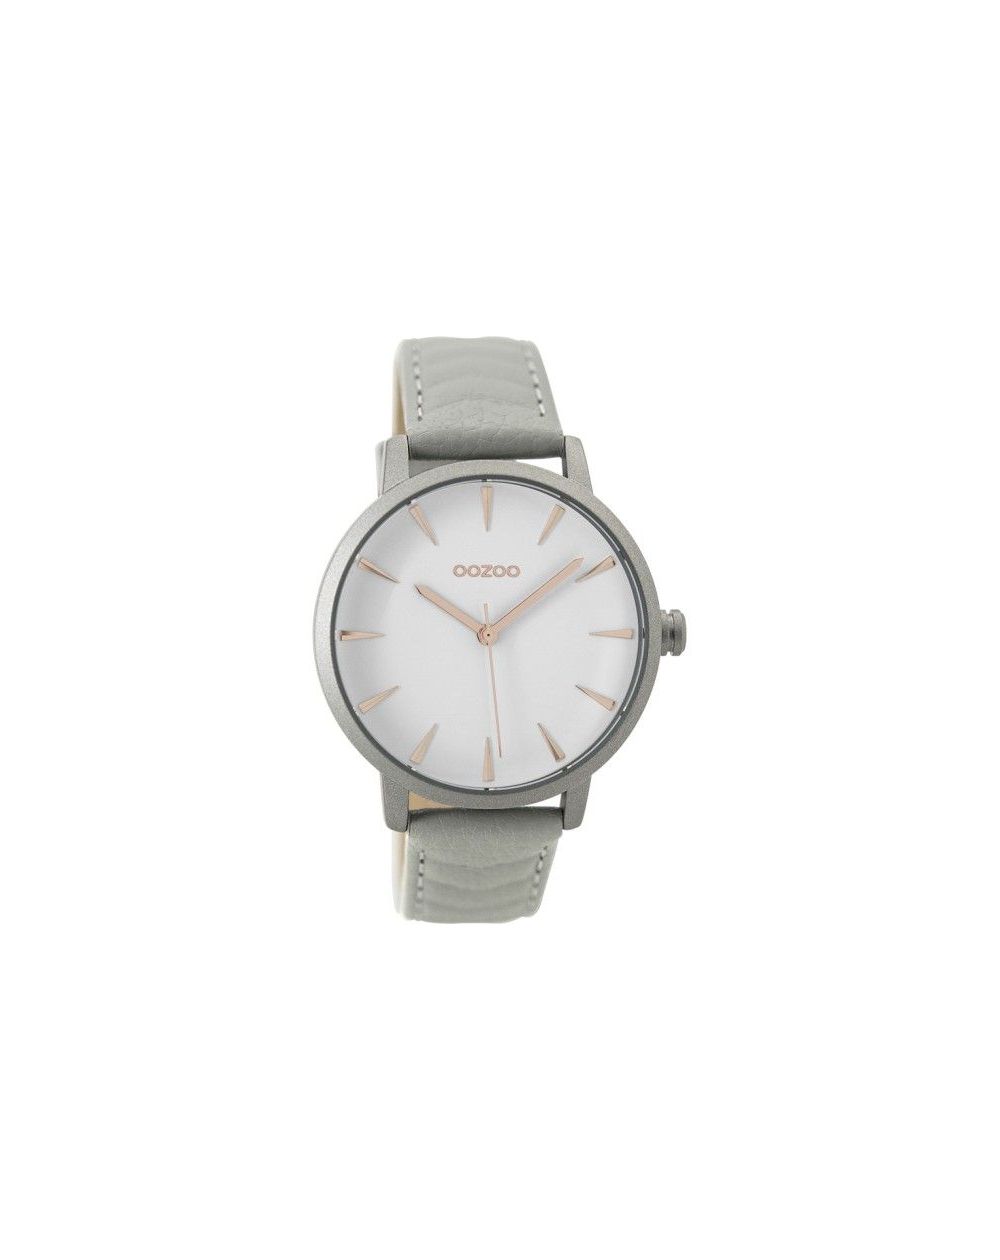 Montre Oozoo Timepieces C9506 grey/white/rose - Marque montre Oozoo